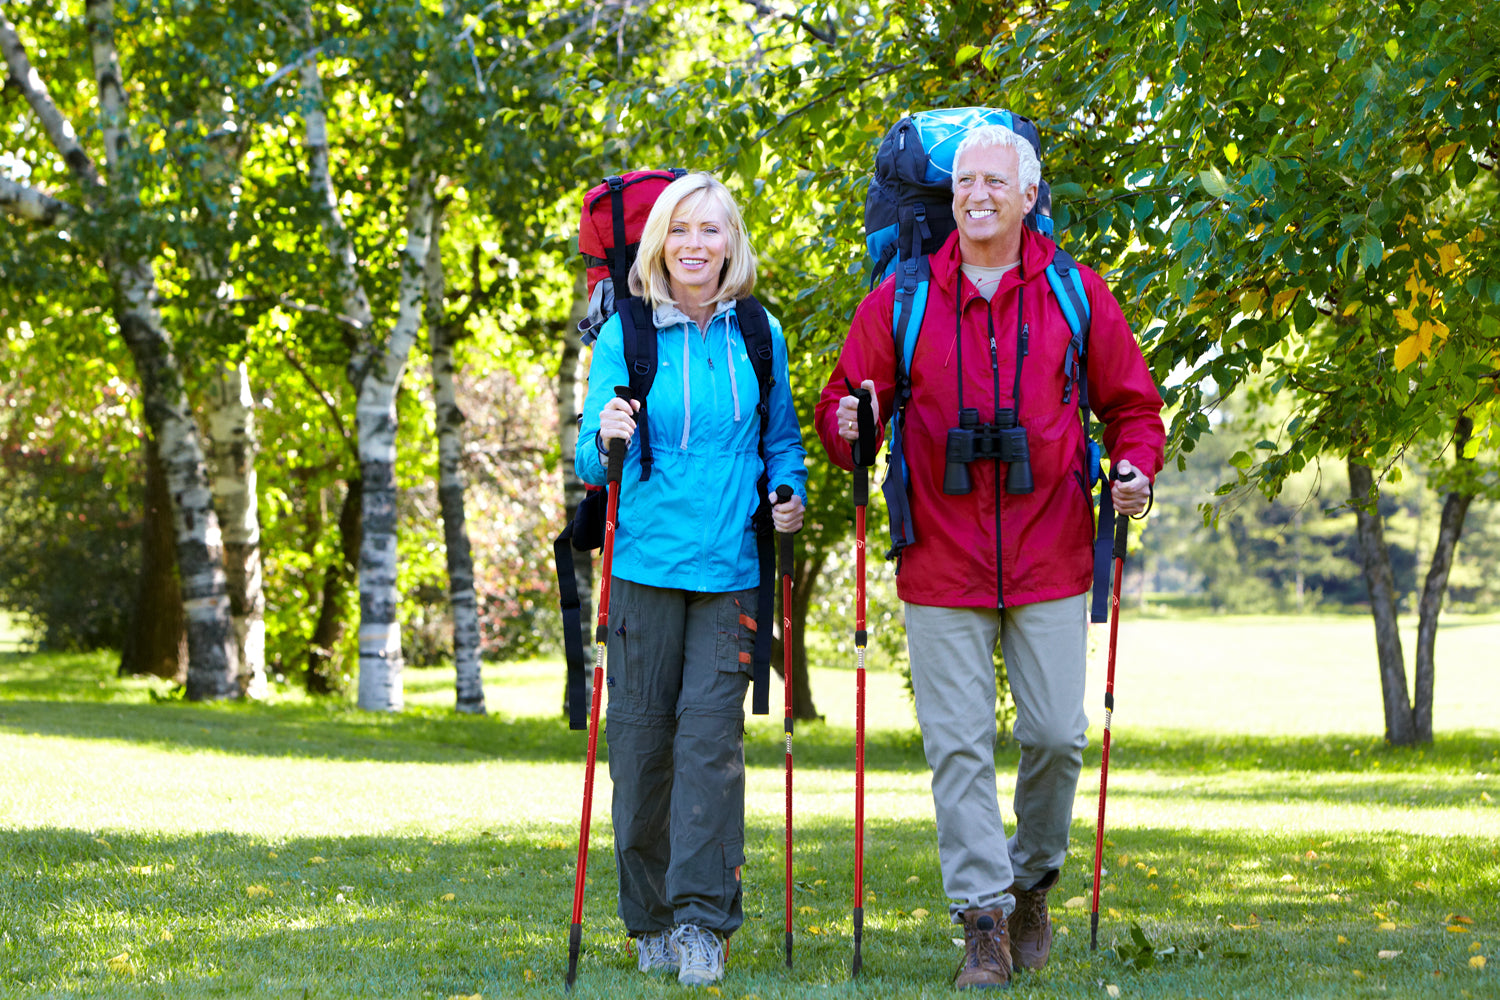 Older couple walking through a park with prosourcefit trekking poles